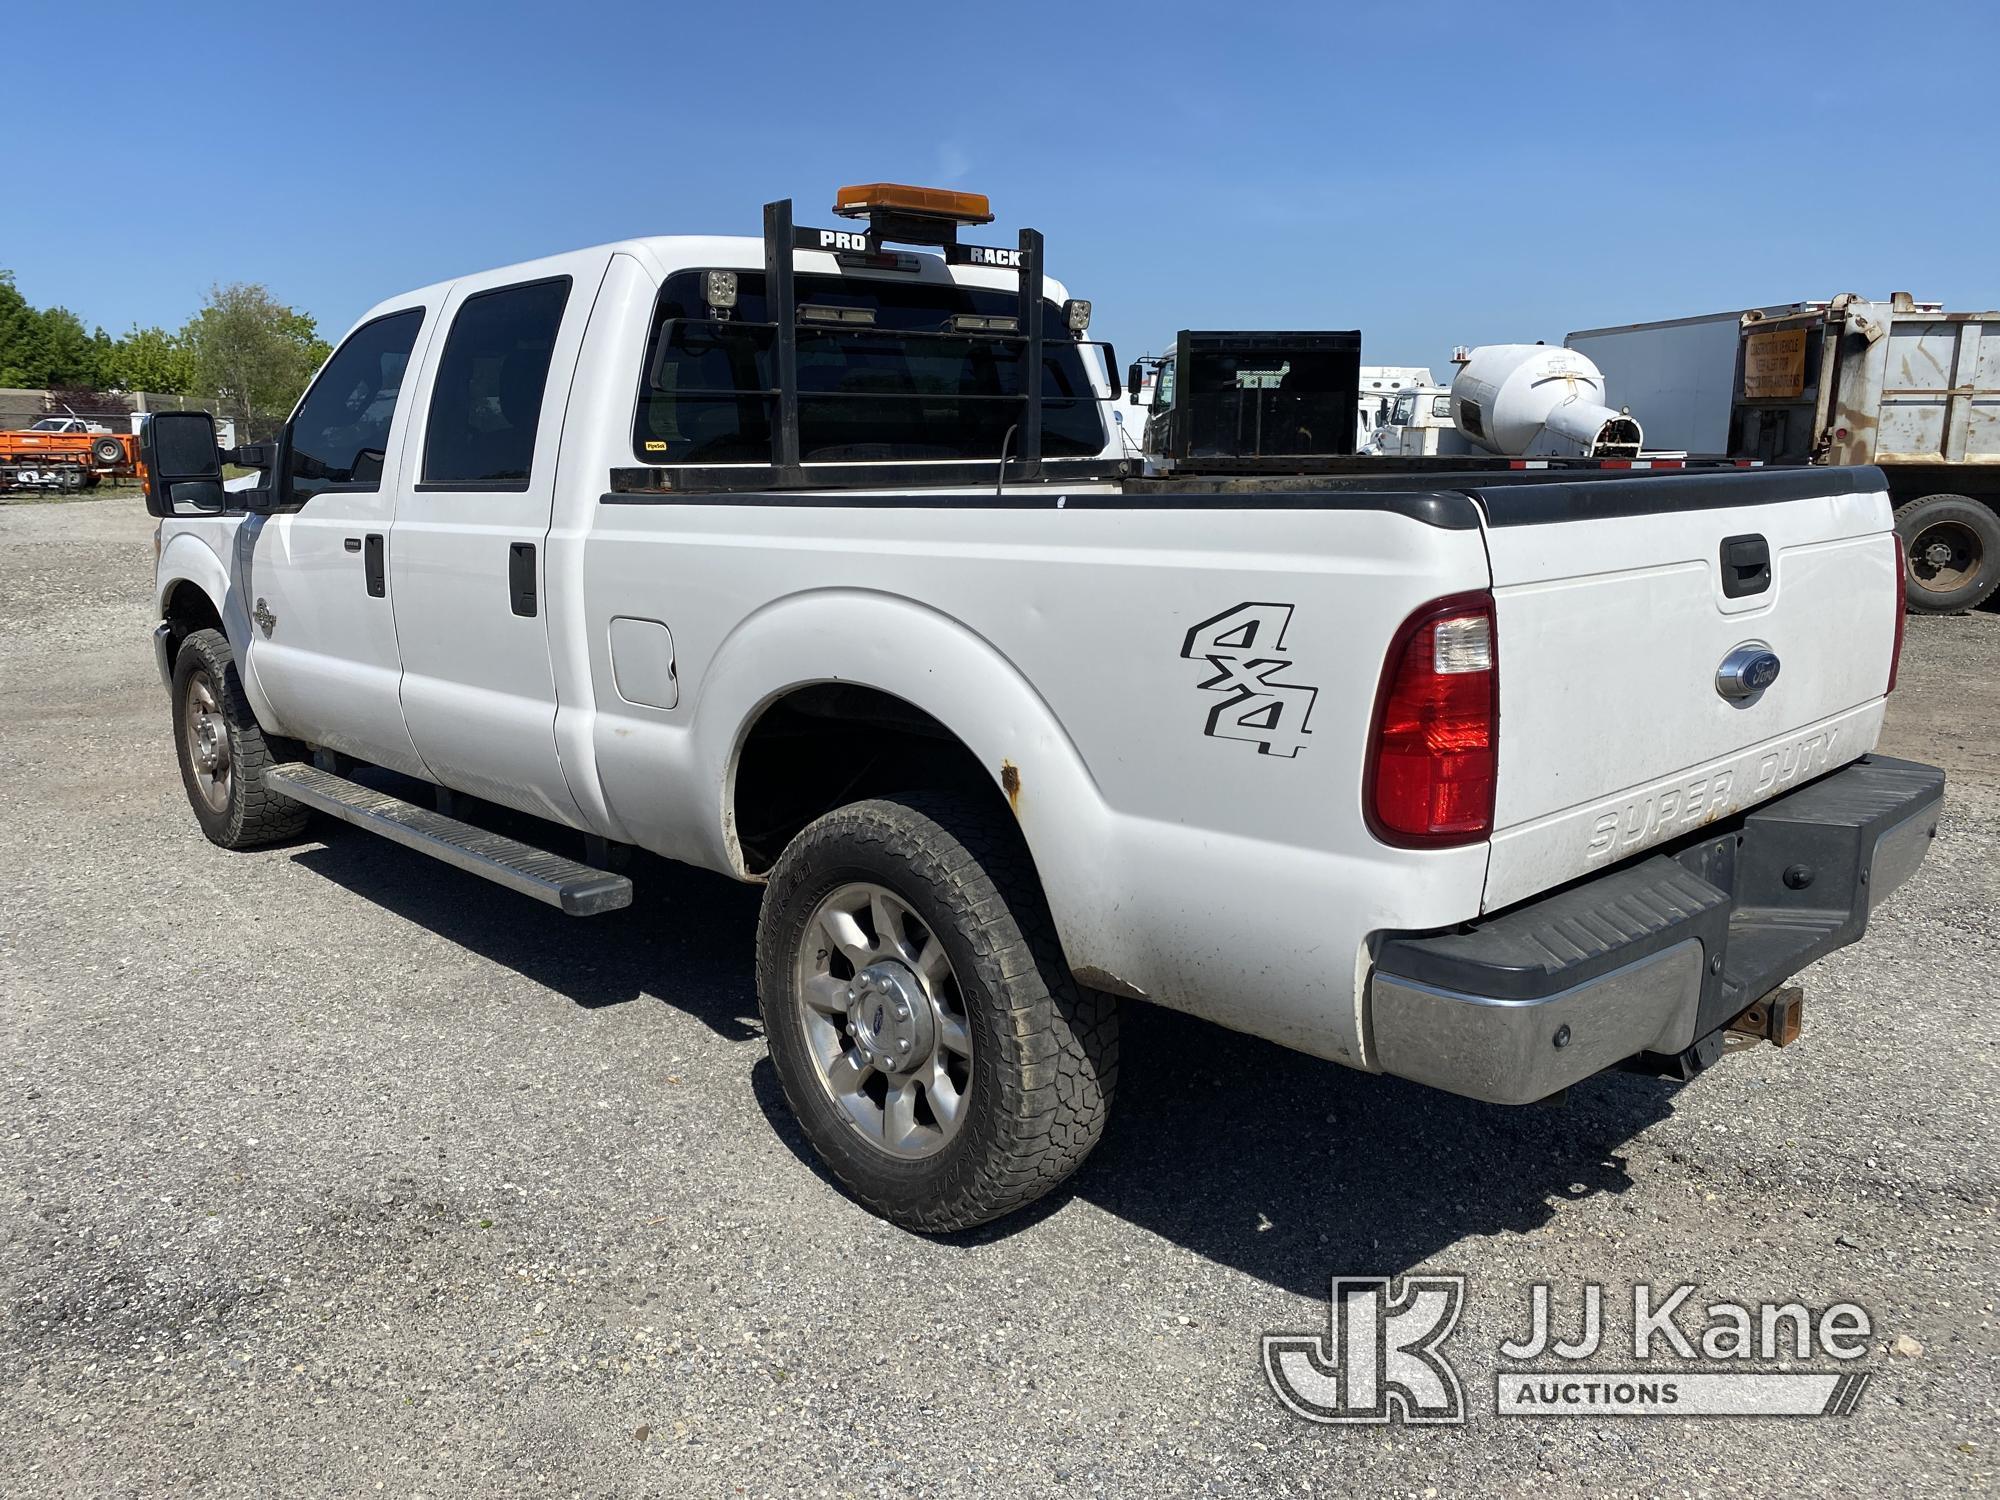 (Plymouth Meeting, PA) 2013 Ford F250 4x4 Crew-Cab Pickup Truck Runs & Moves, Body & Rust Damage